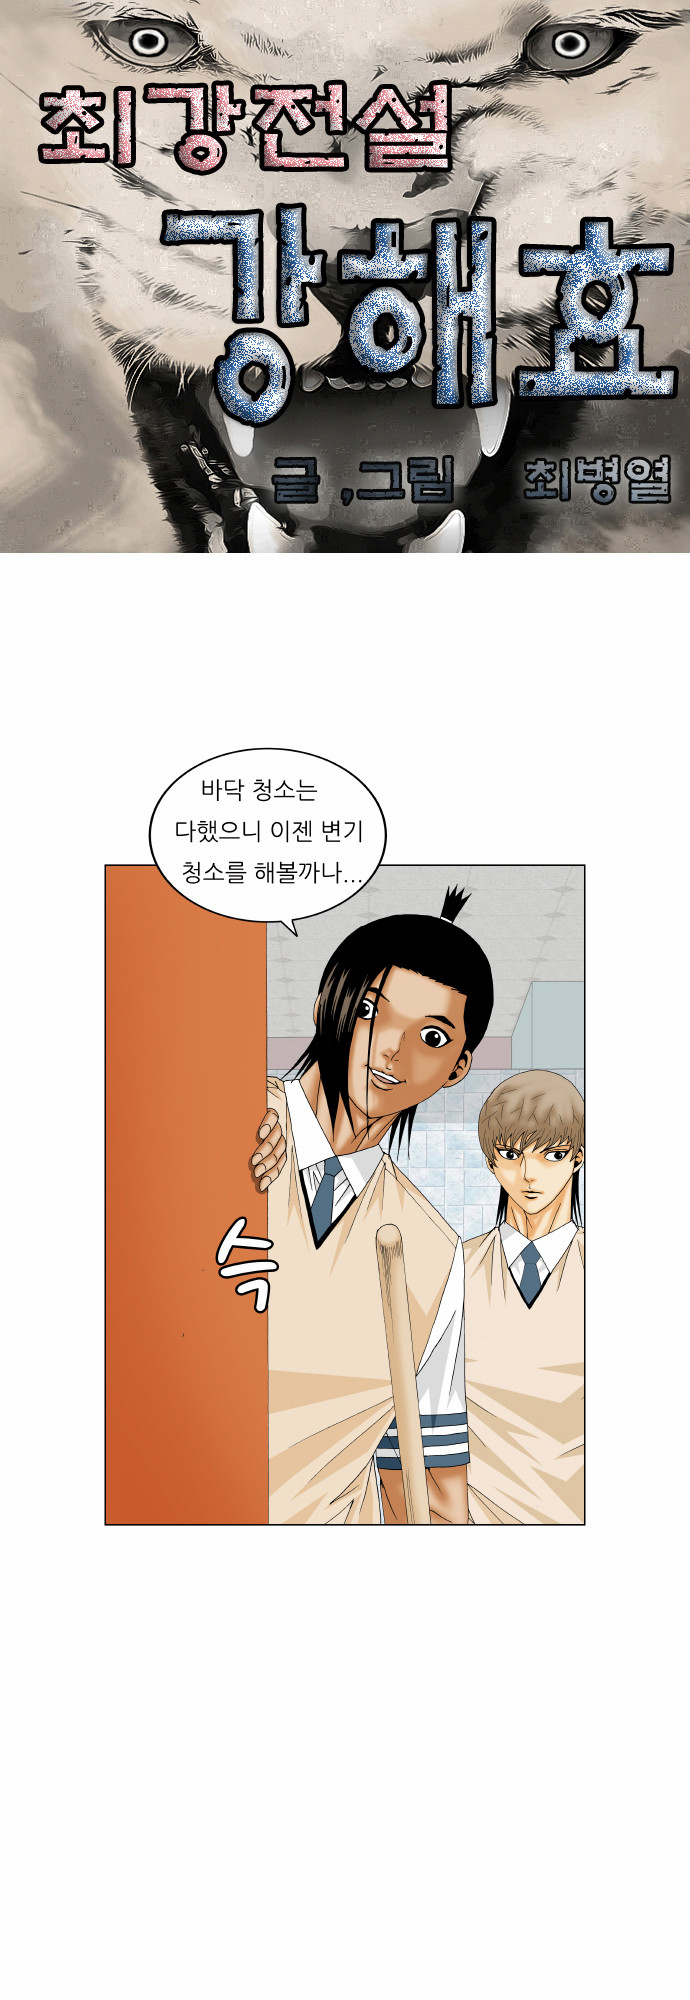 Ultimate Legend - Kang Hae Hyo - Chapter 175 - Page 1